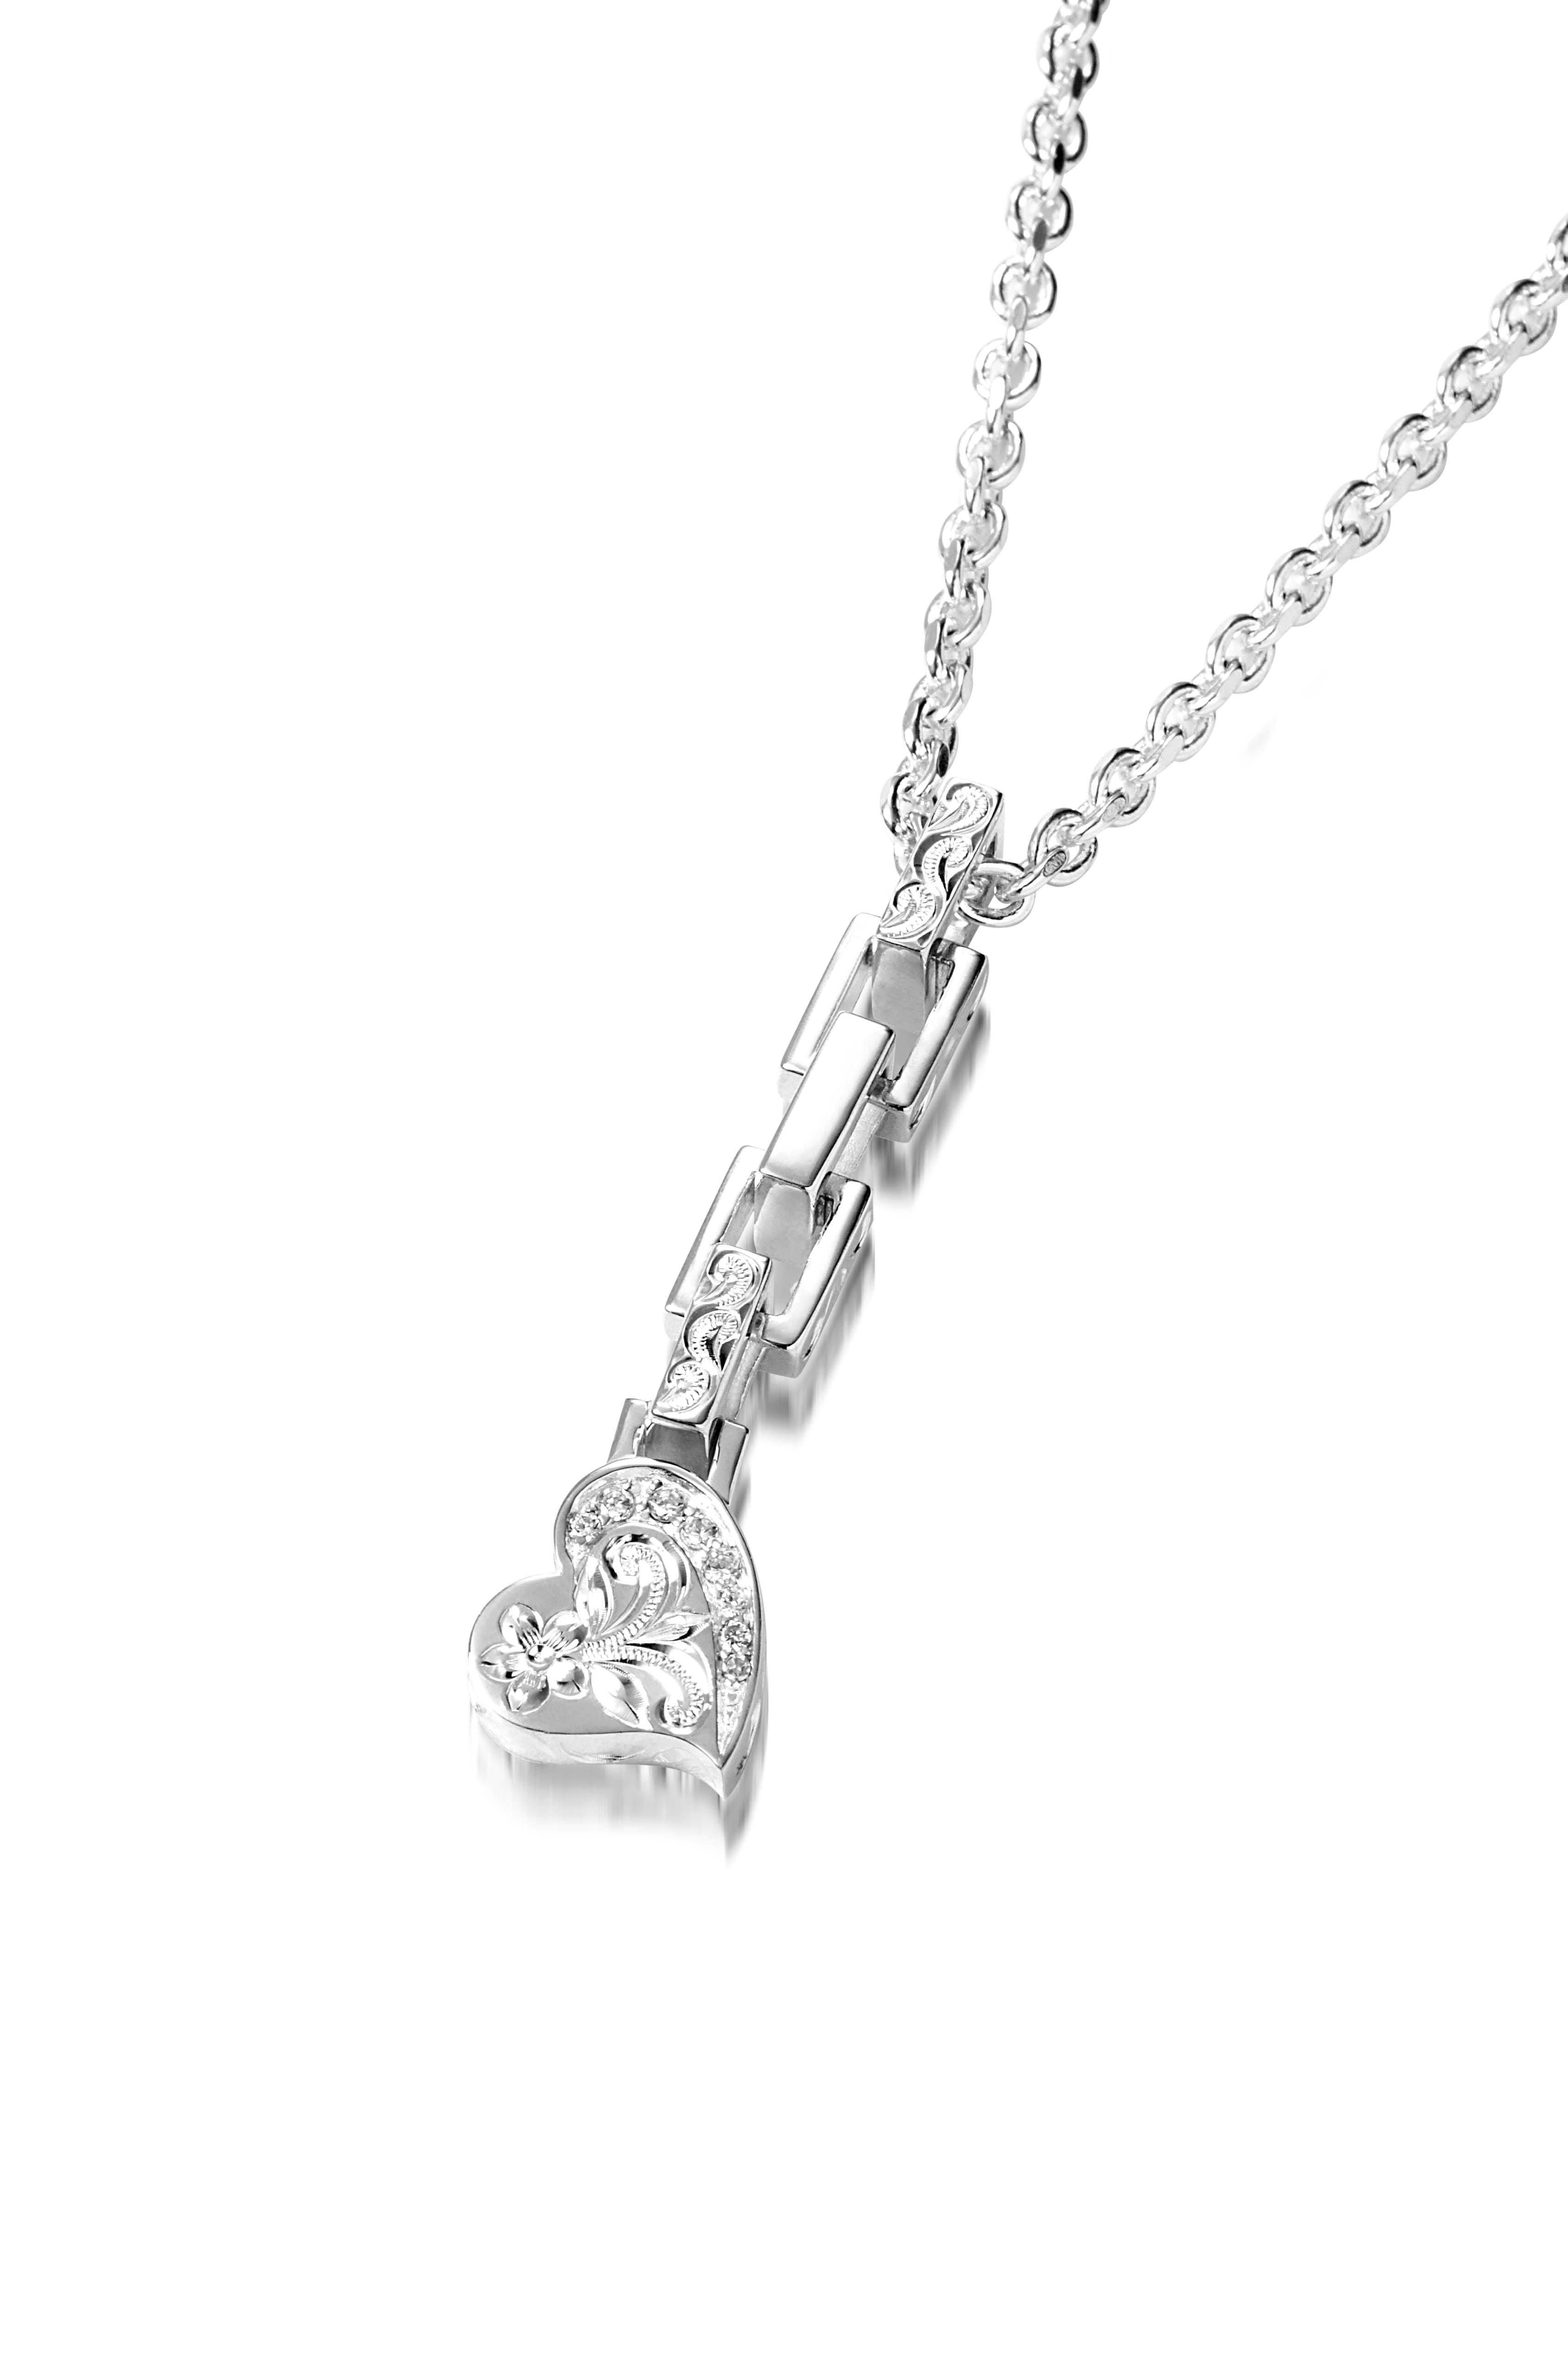 The picture shows a 925 sterling silver heart pendant with hand-engraved designs including a plumeria paired with diamonds.